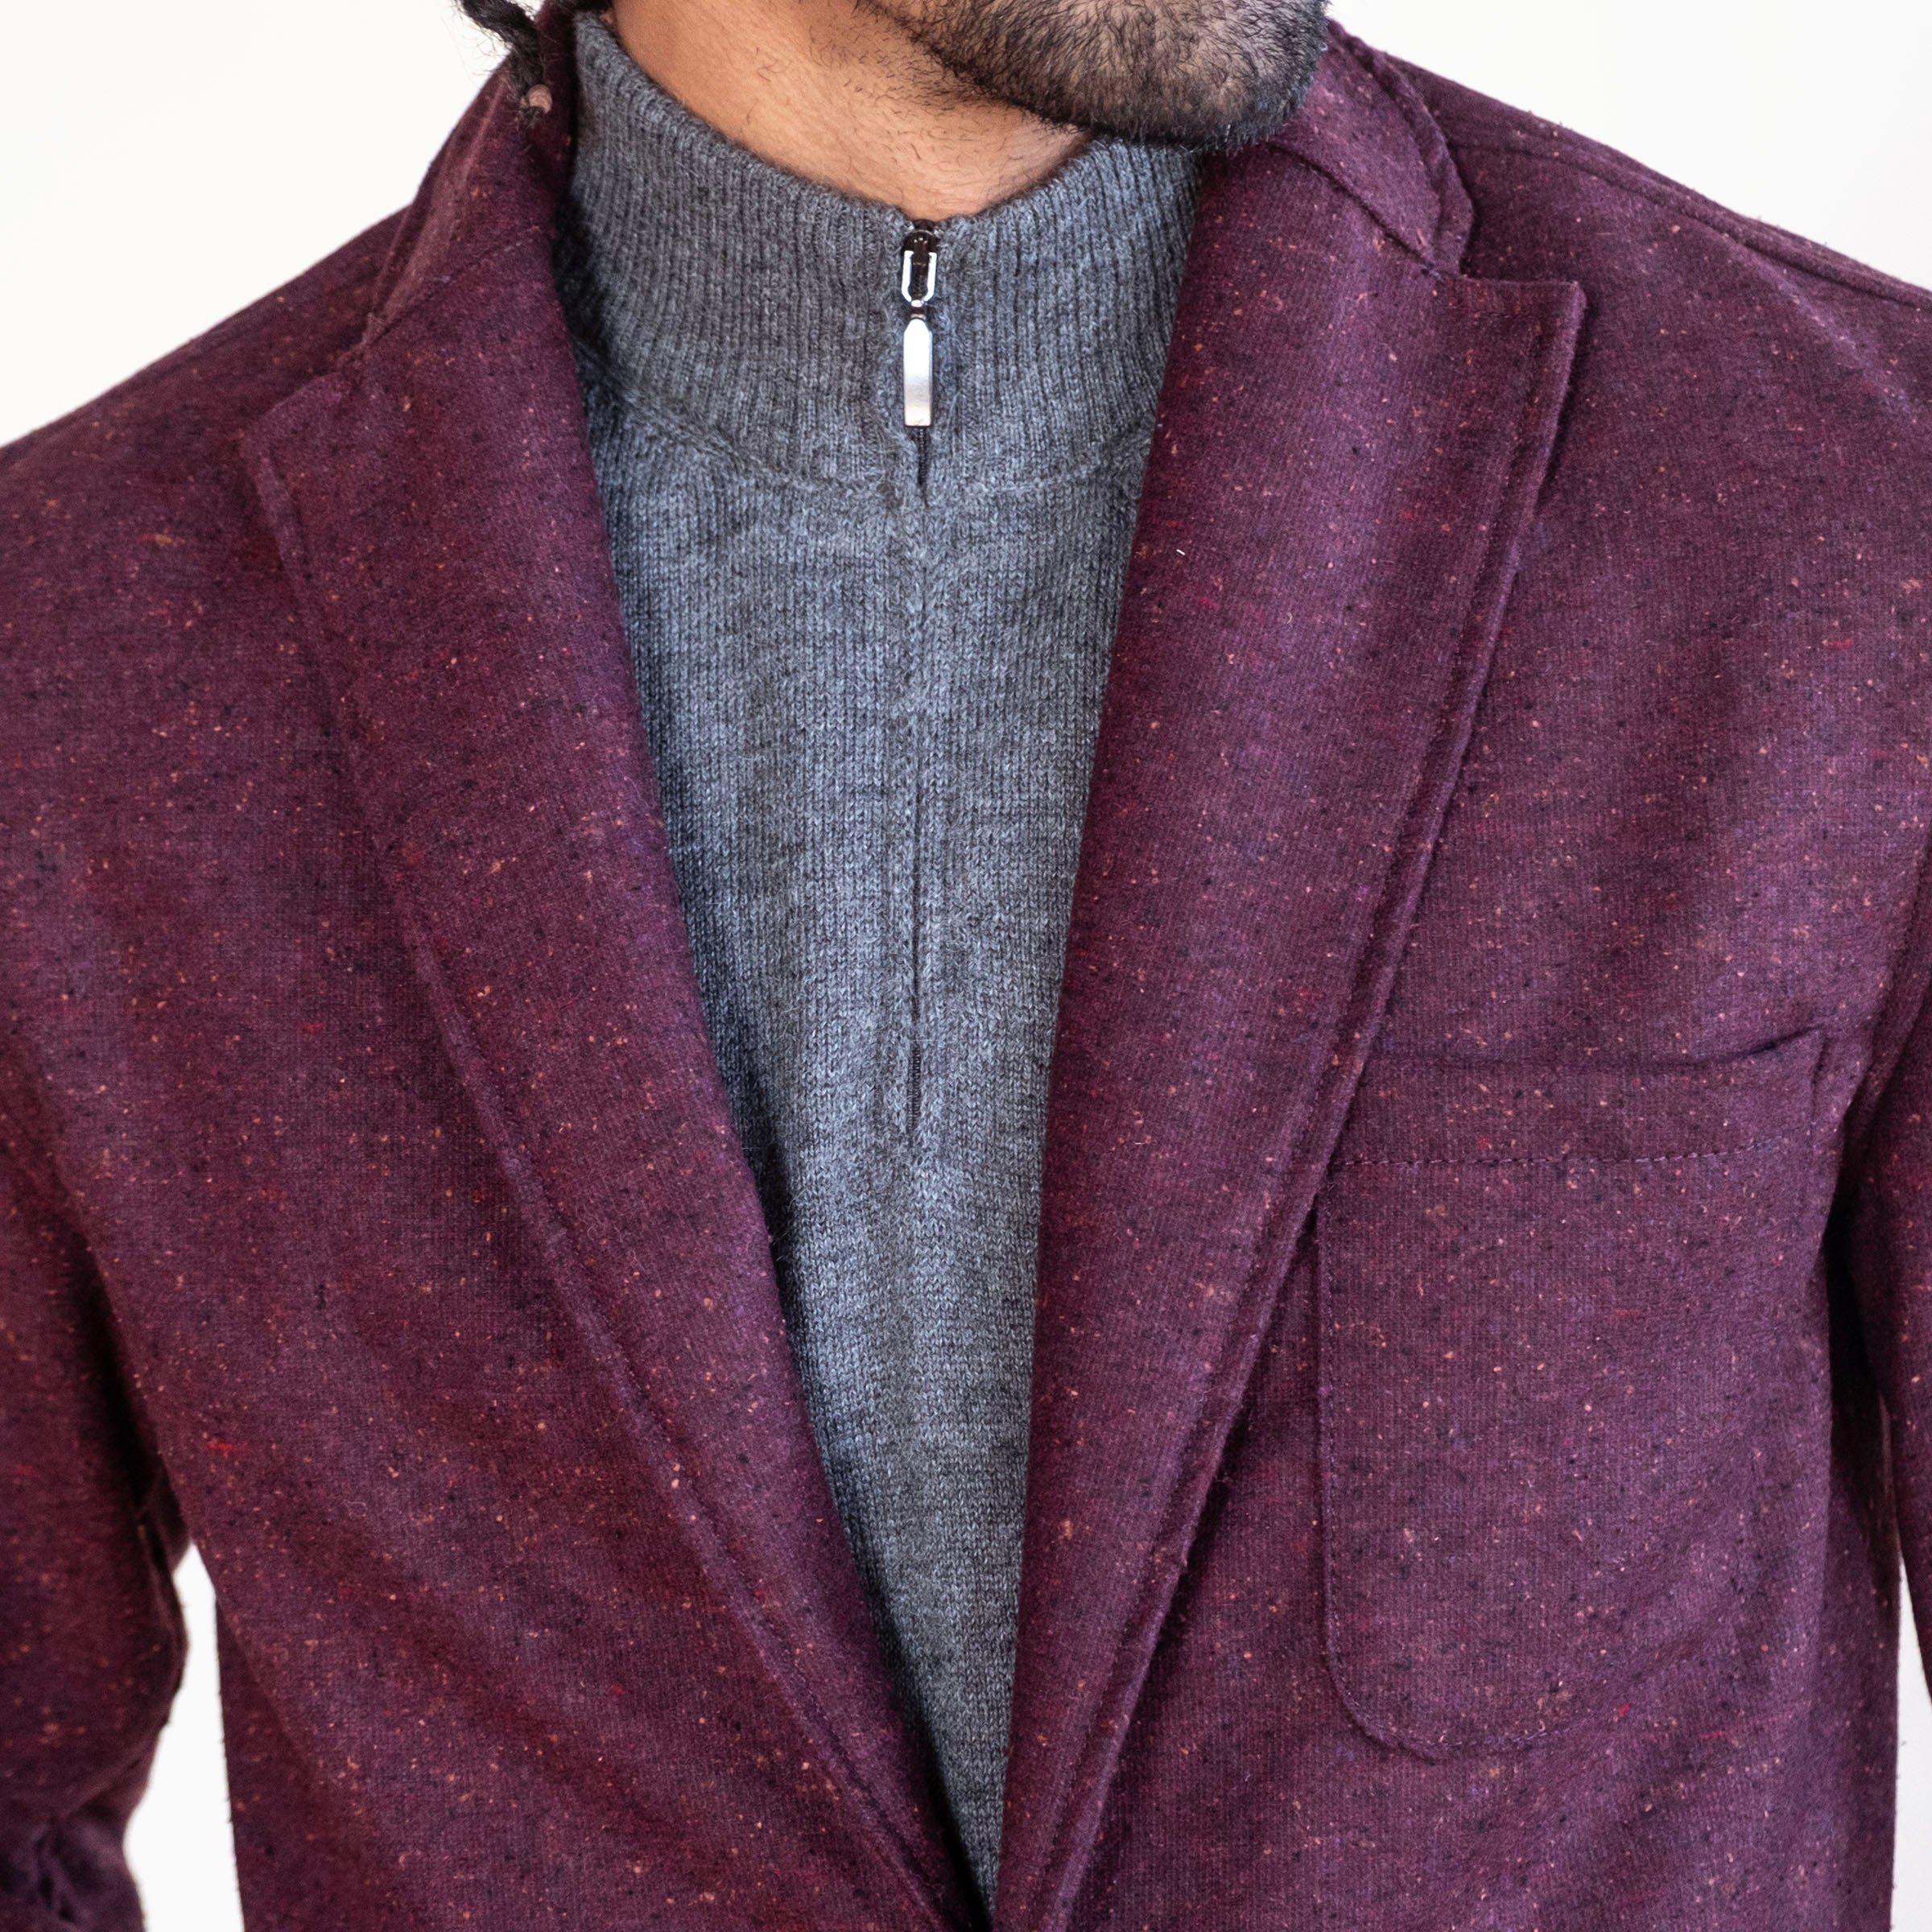 Sinclair Sportcoat Fireside Donegal Wool-Cashmere